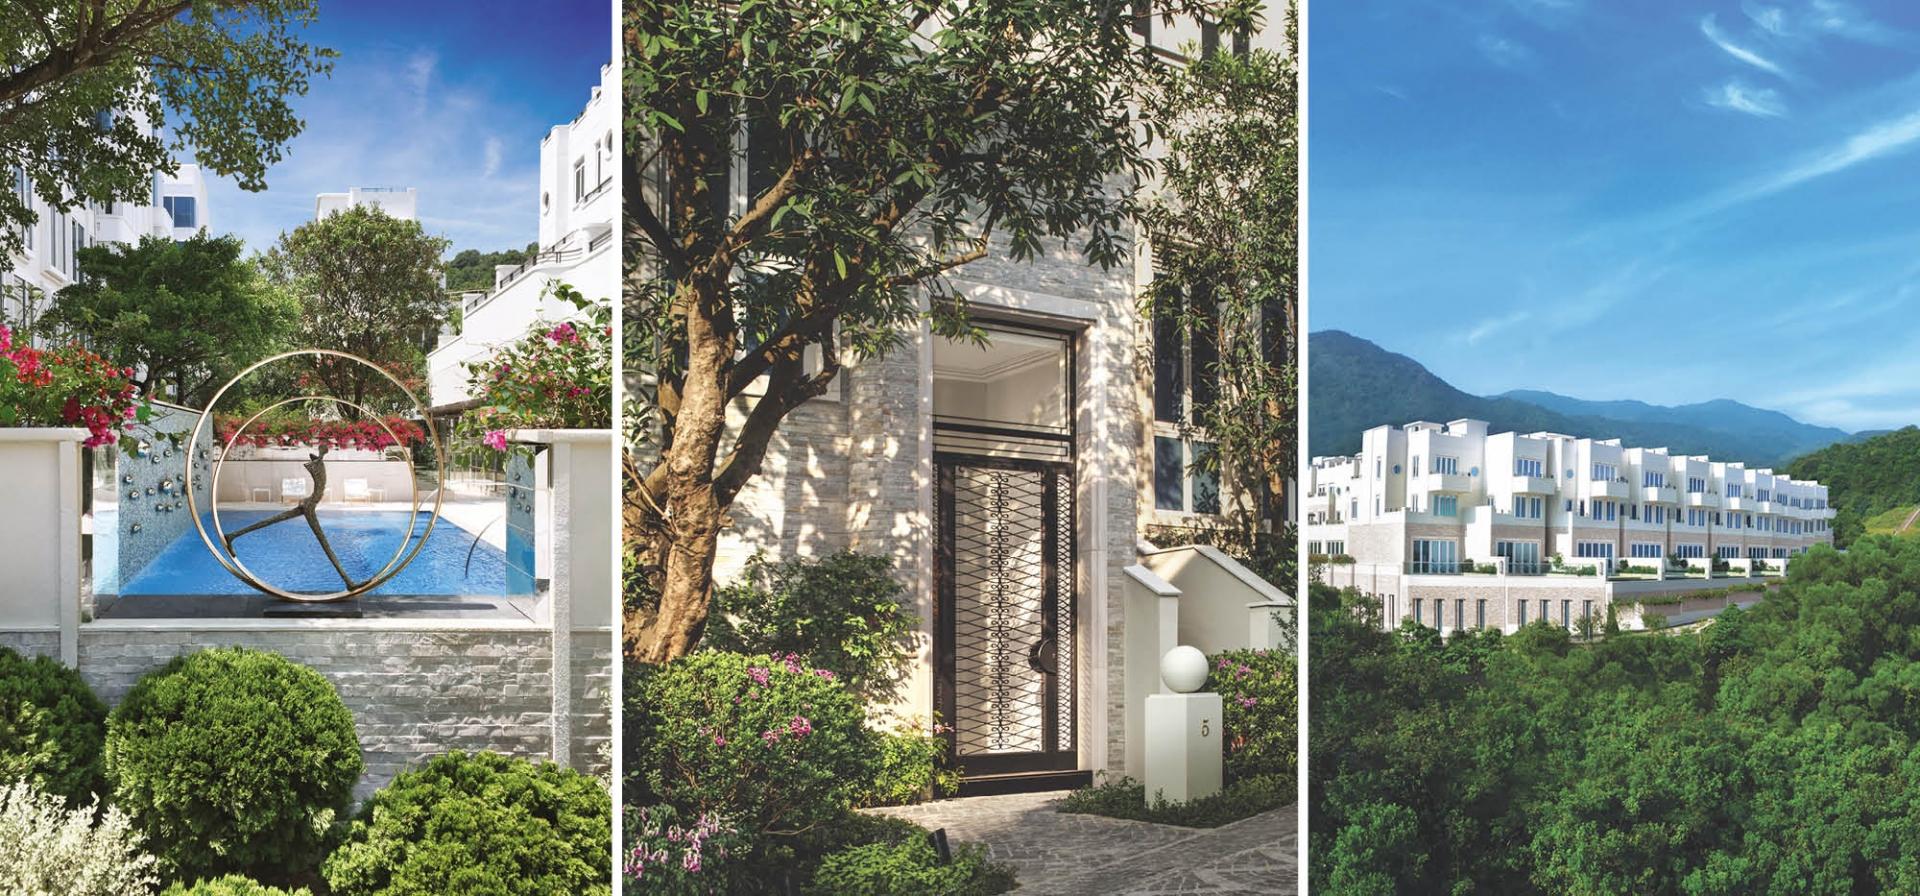 7 Recently Launched Luxury Residential Develops in Hong Kong that We Love